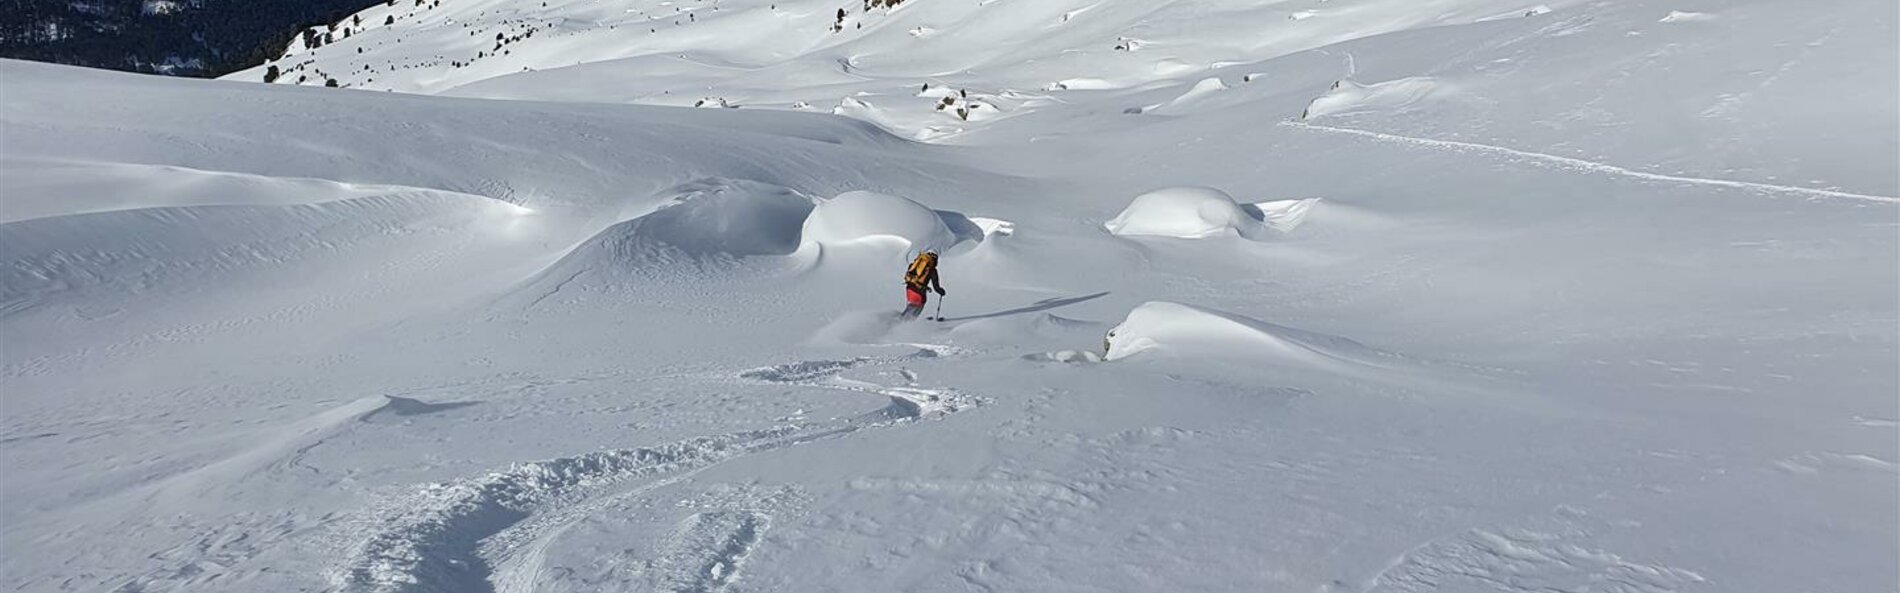 Skier*in during the descent from the Grafenspitze © Land Tirol